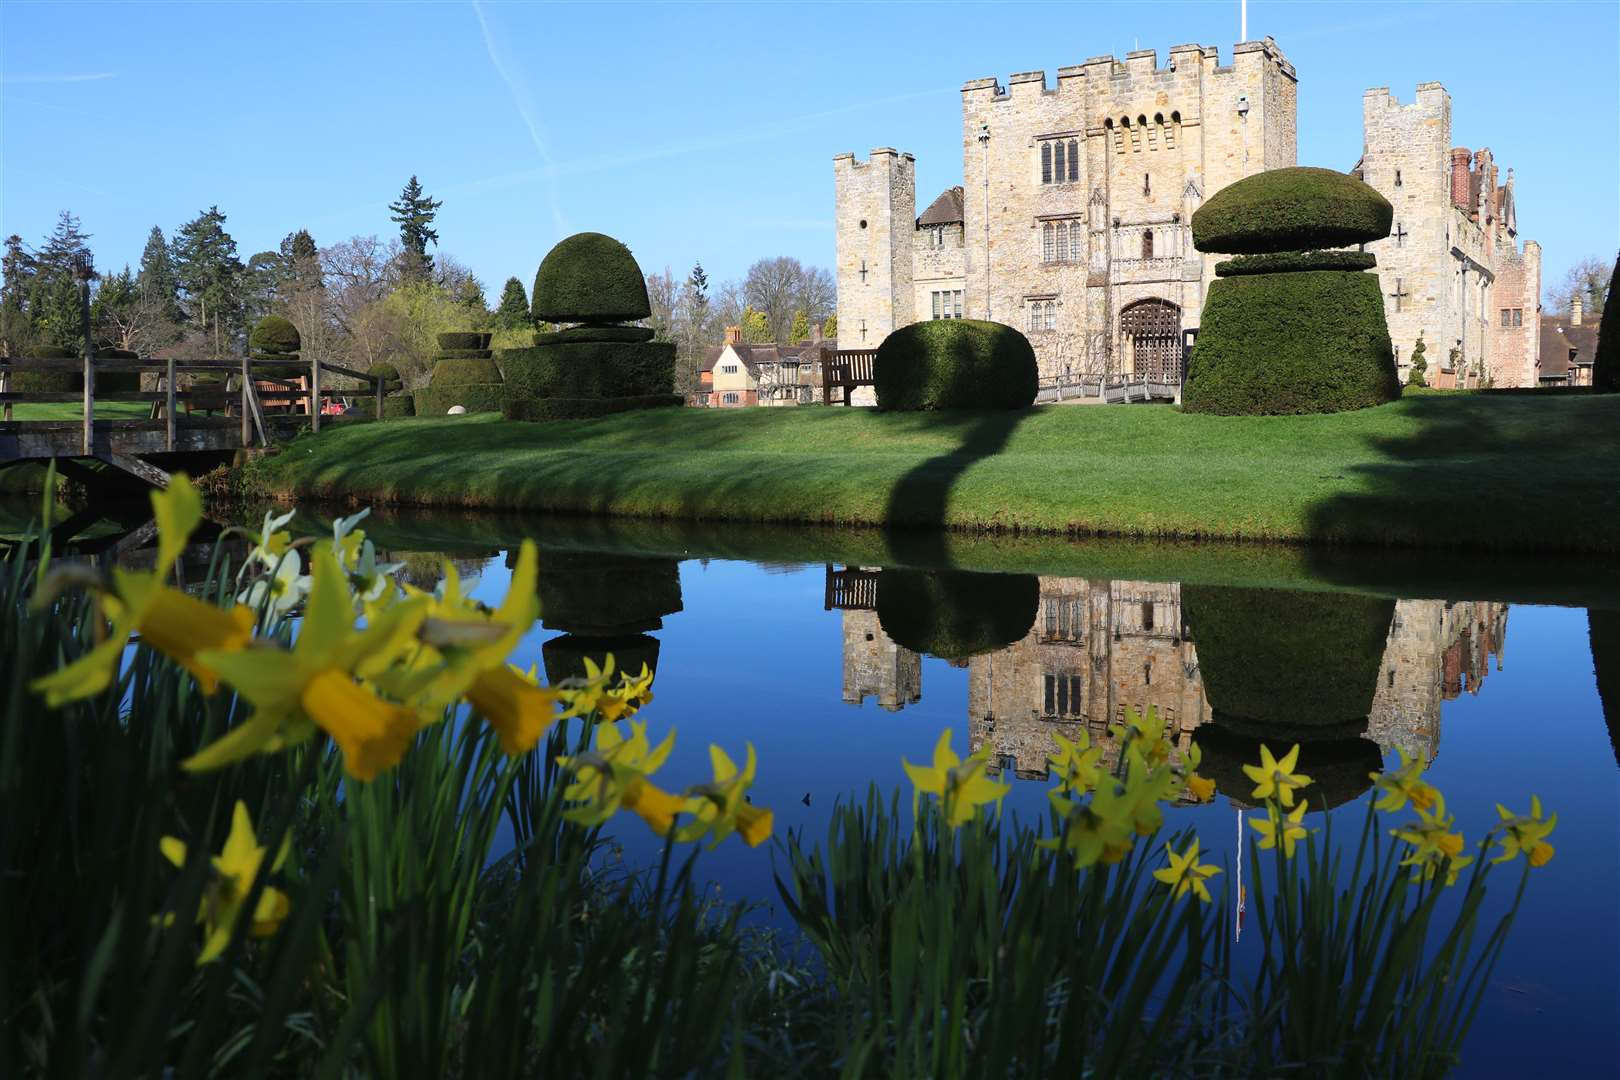 Some of the flowers date back to when William Waldorf Astor owned the castle. Picture: Hever Castle and Gardens